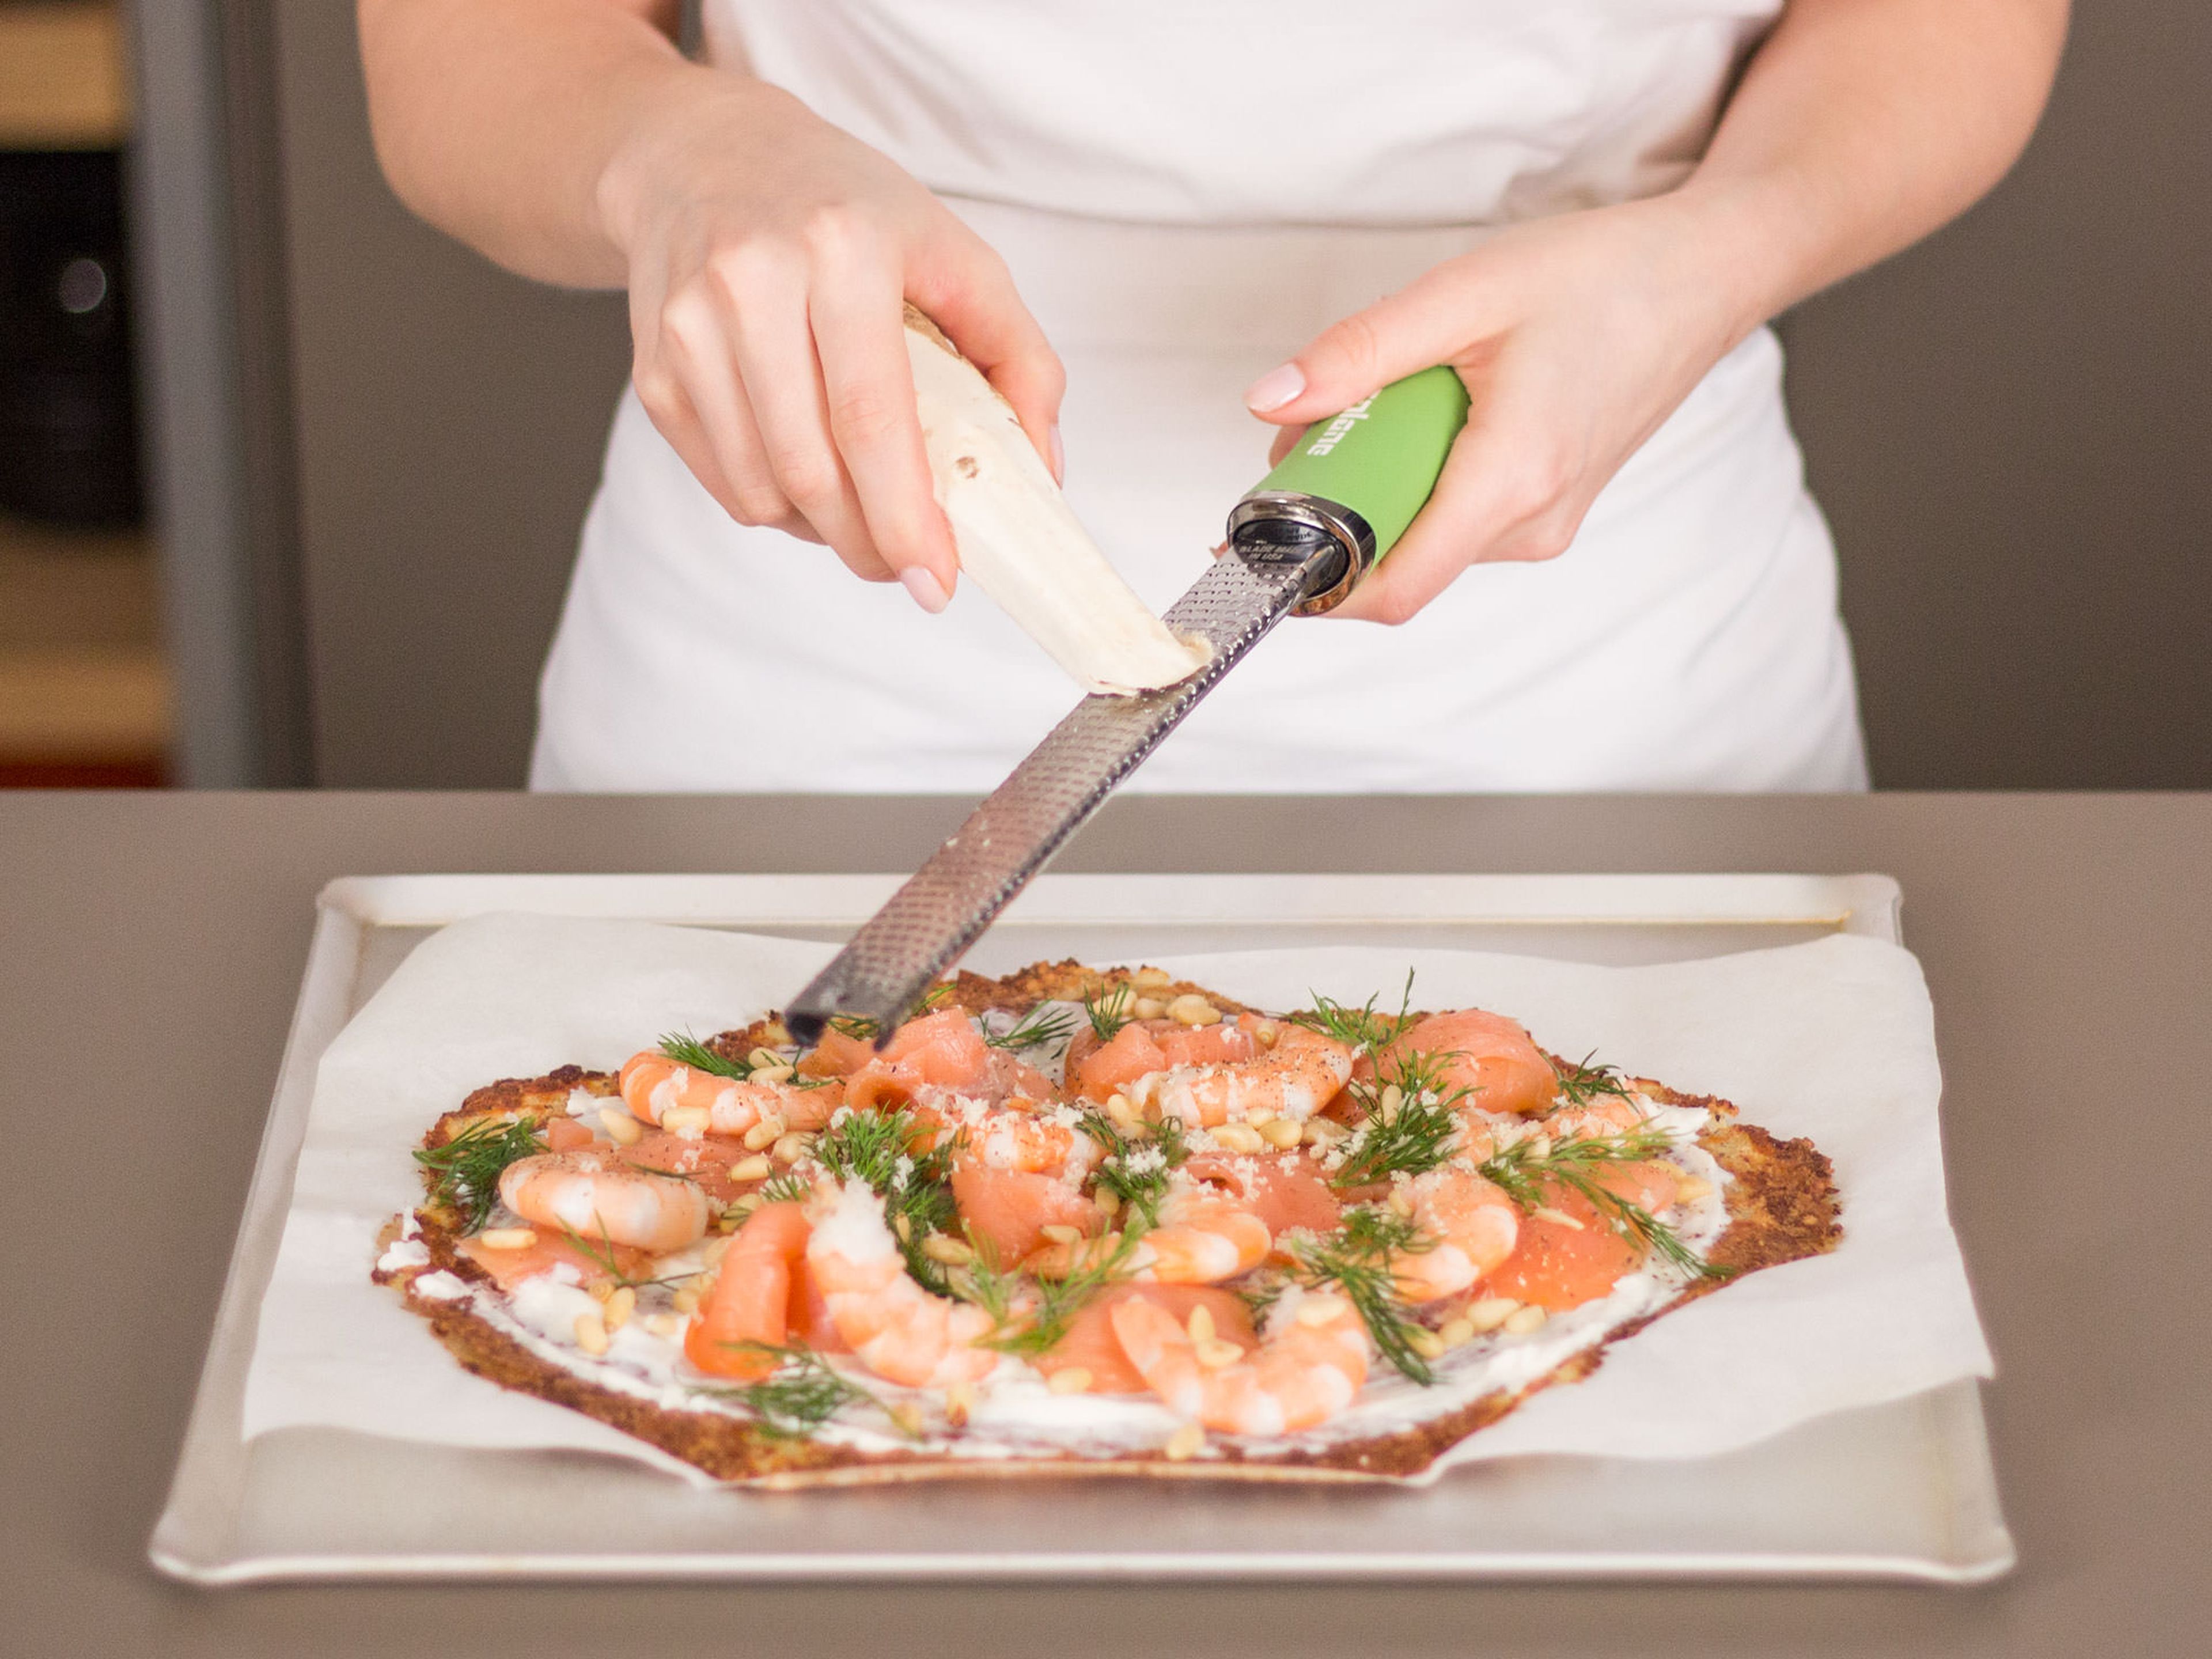 Spread ricotta evenly over crust. Then, top pizza off with salmon, shrimp, pine nuts, and freshly grated horseradish. Garnish with fresh dill.